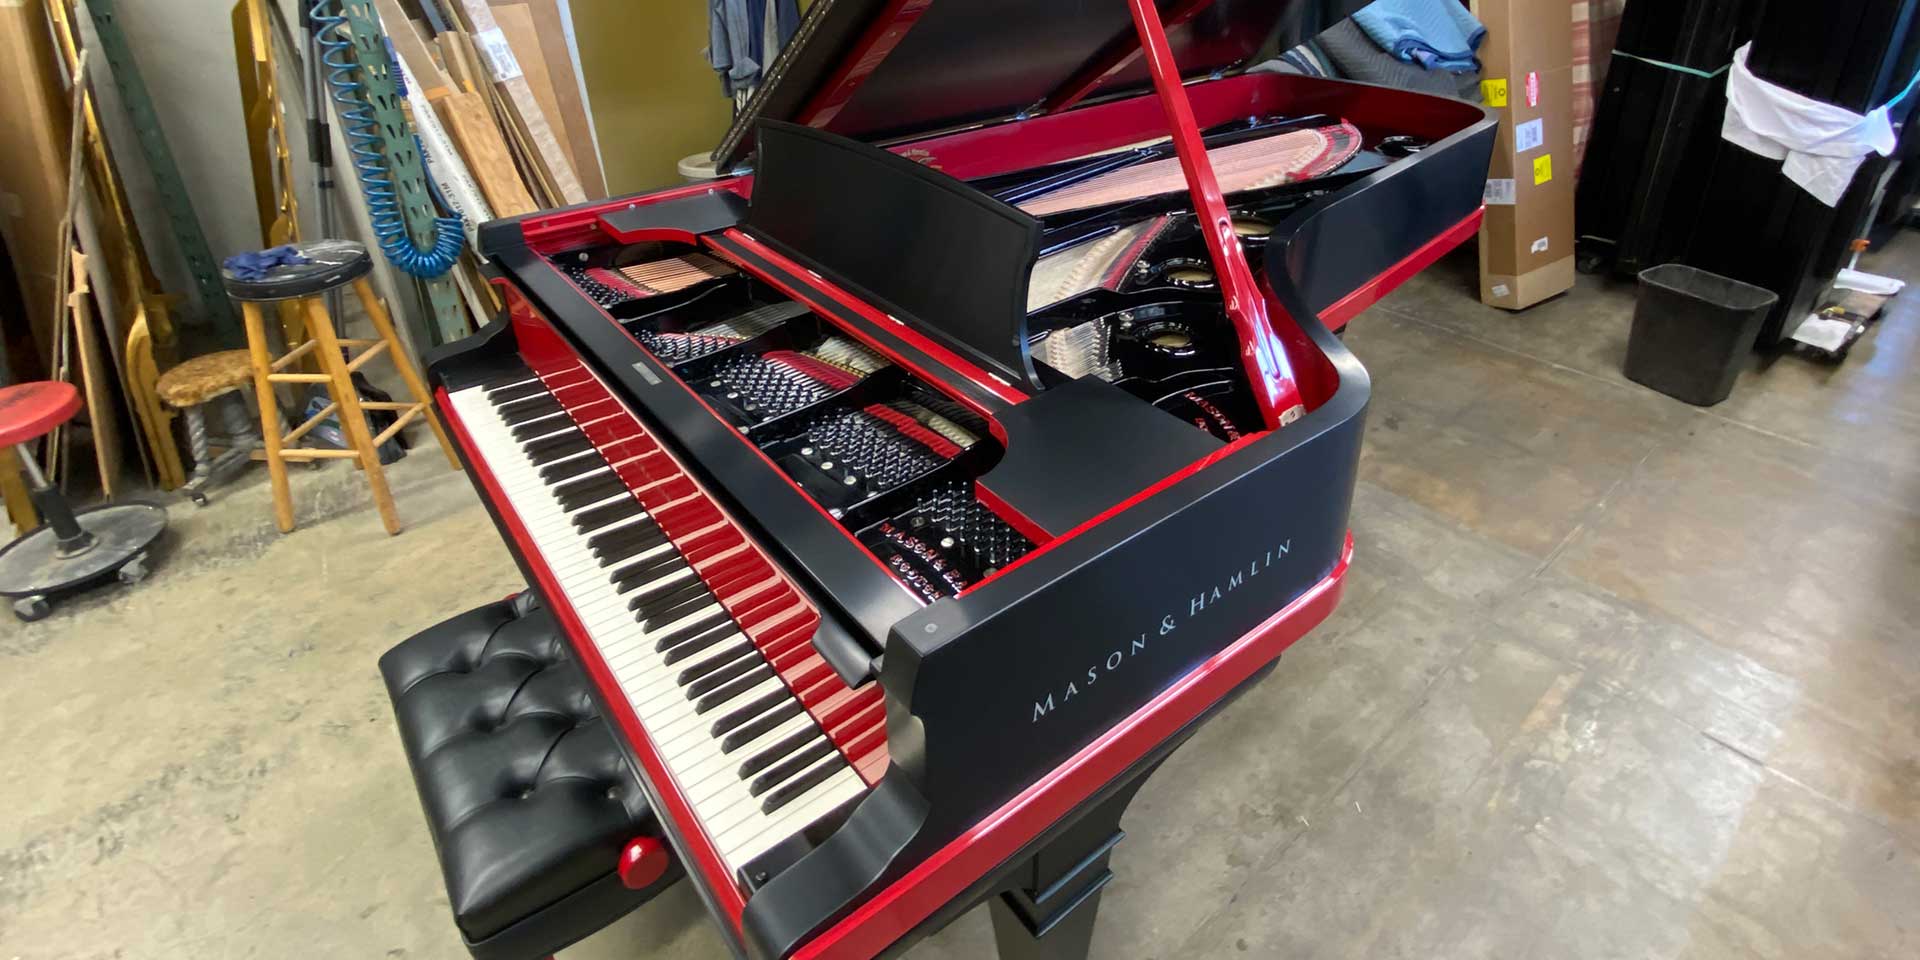 1937 Mason and Hamlin CC2 concert grand piano with Wayne Stahnke Live Performance LX high resolution reproducing player piano system